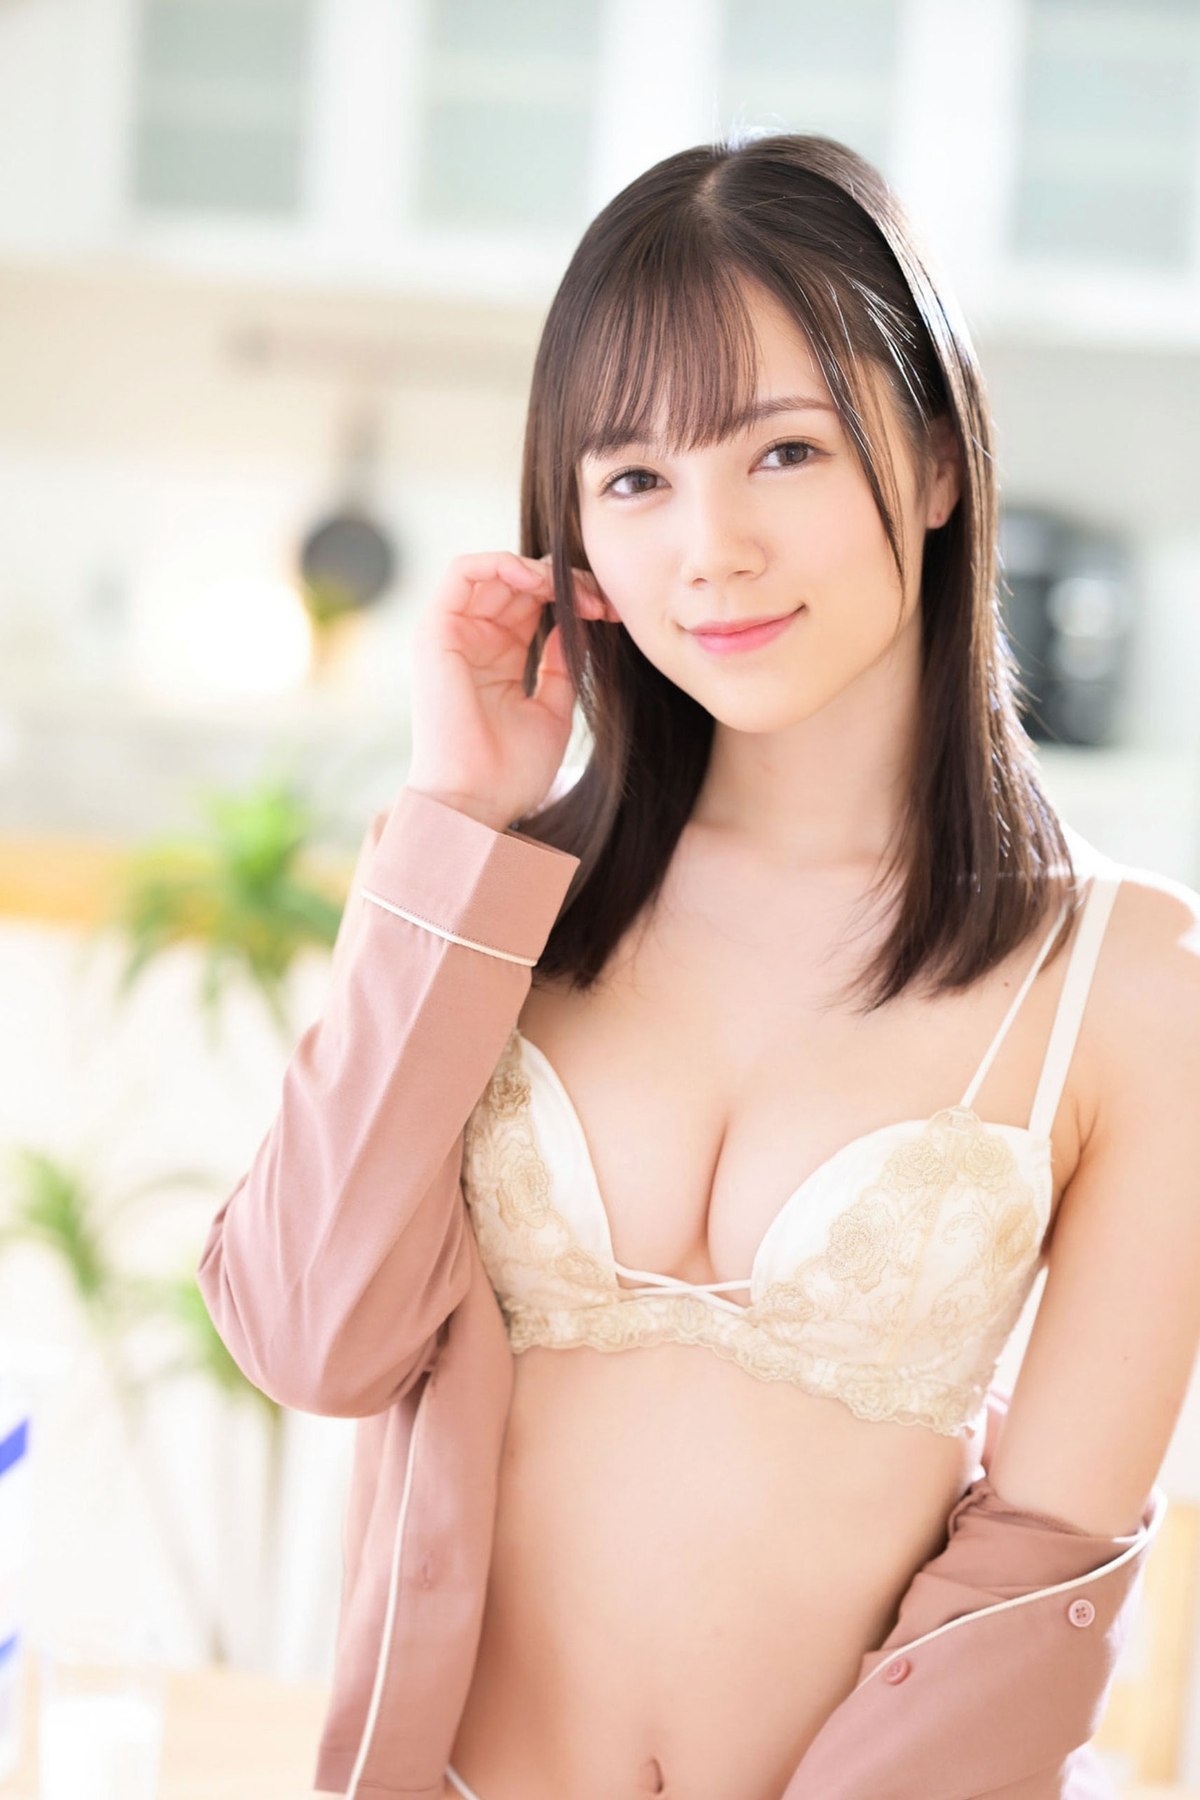 Photobook Remu Suzumori 涼森れむ Ejaculates And Lives Together A 0008 9773533881.jpg